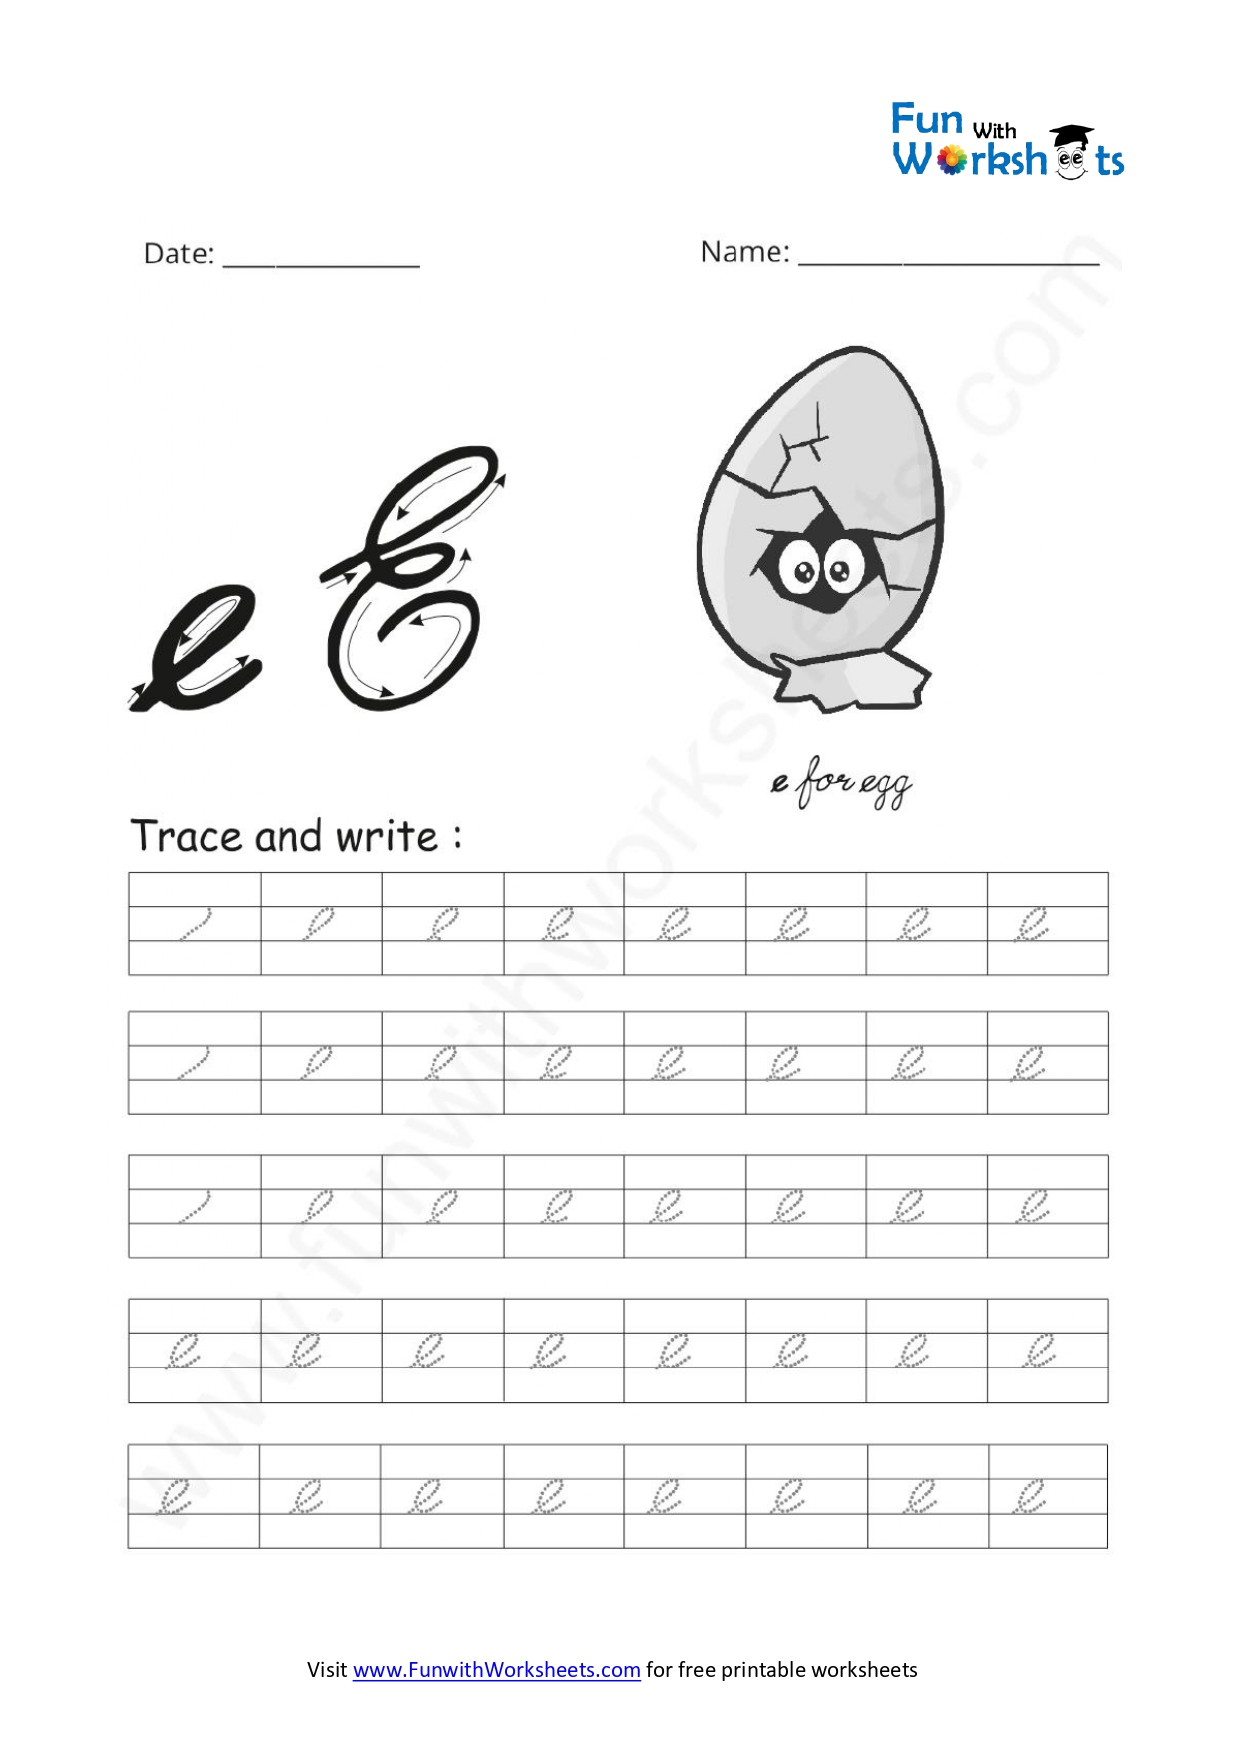 cursive-number-writing-free-printable-worksheets-on-math-and-numbers-k-12-brobst-systems-kids